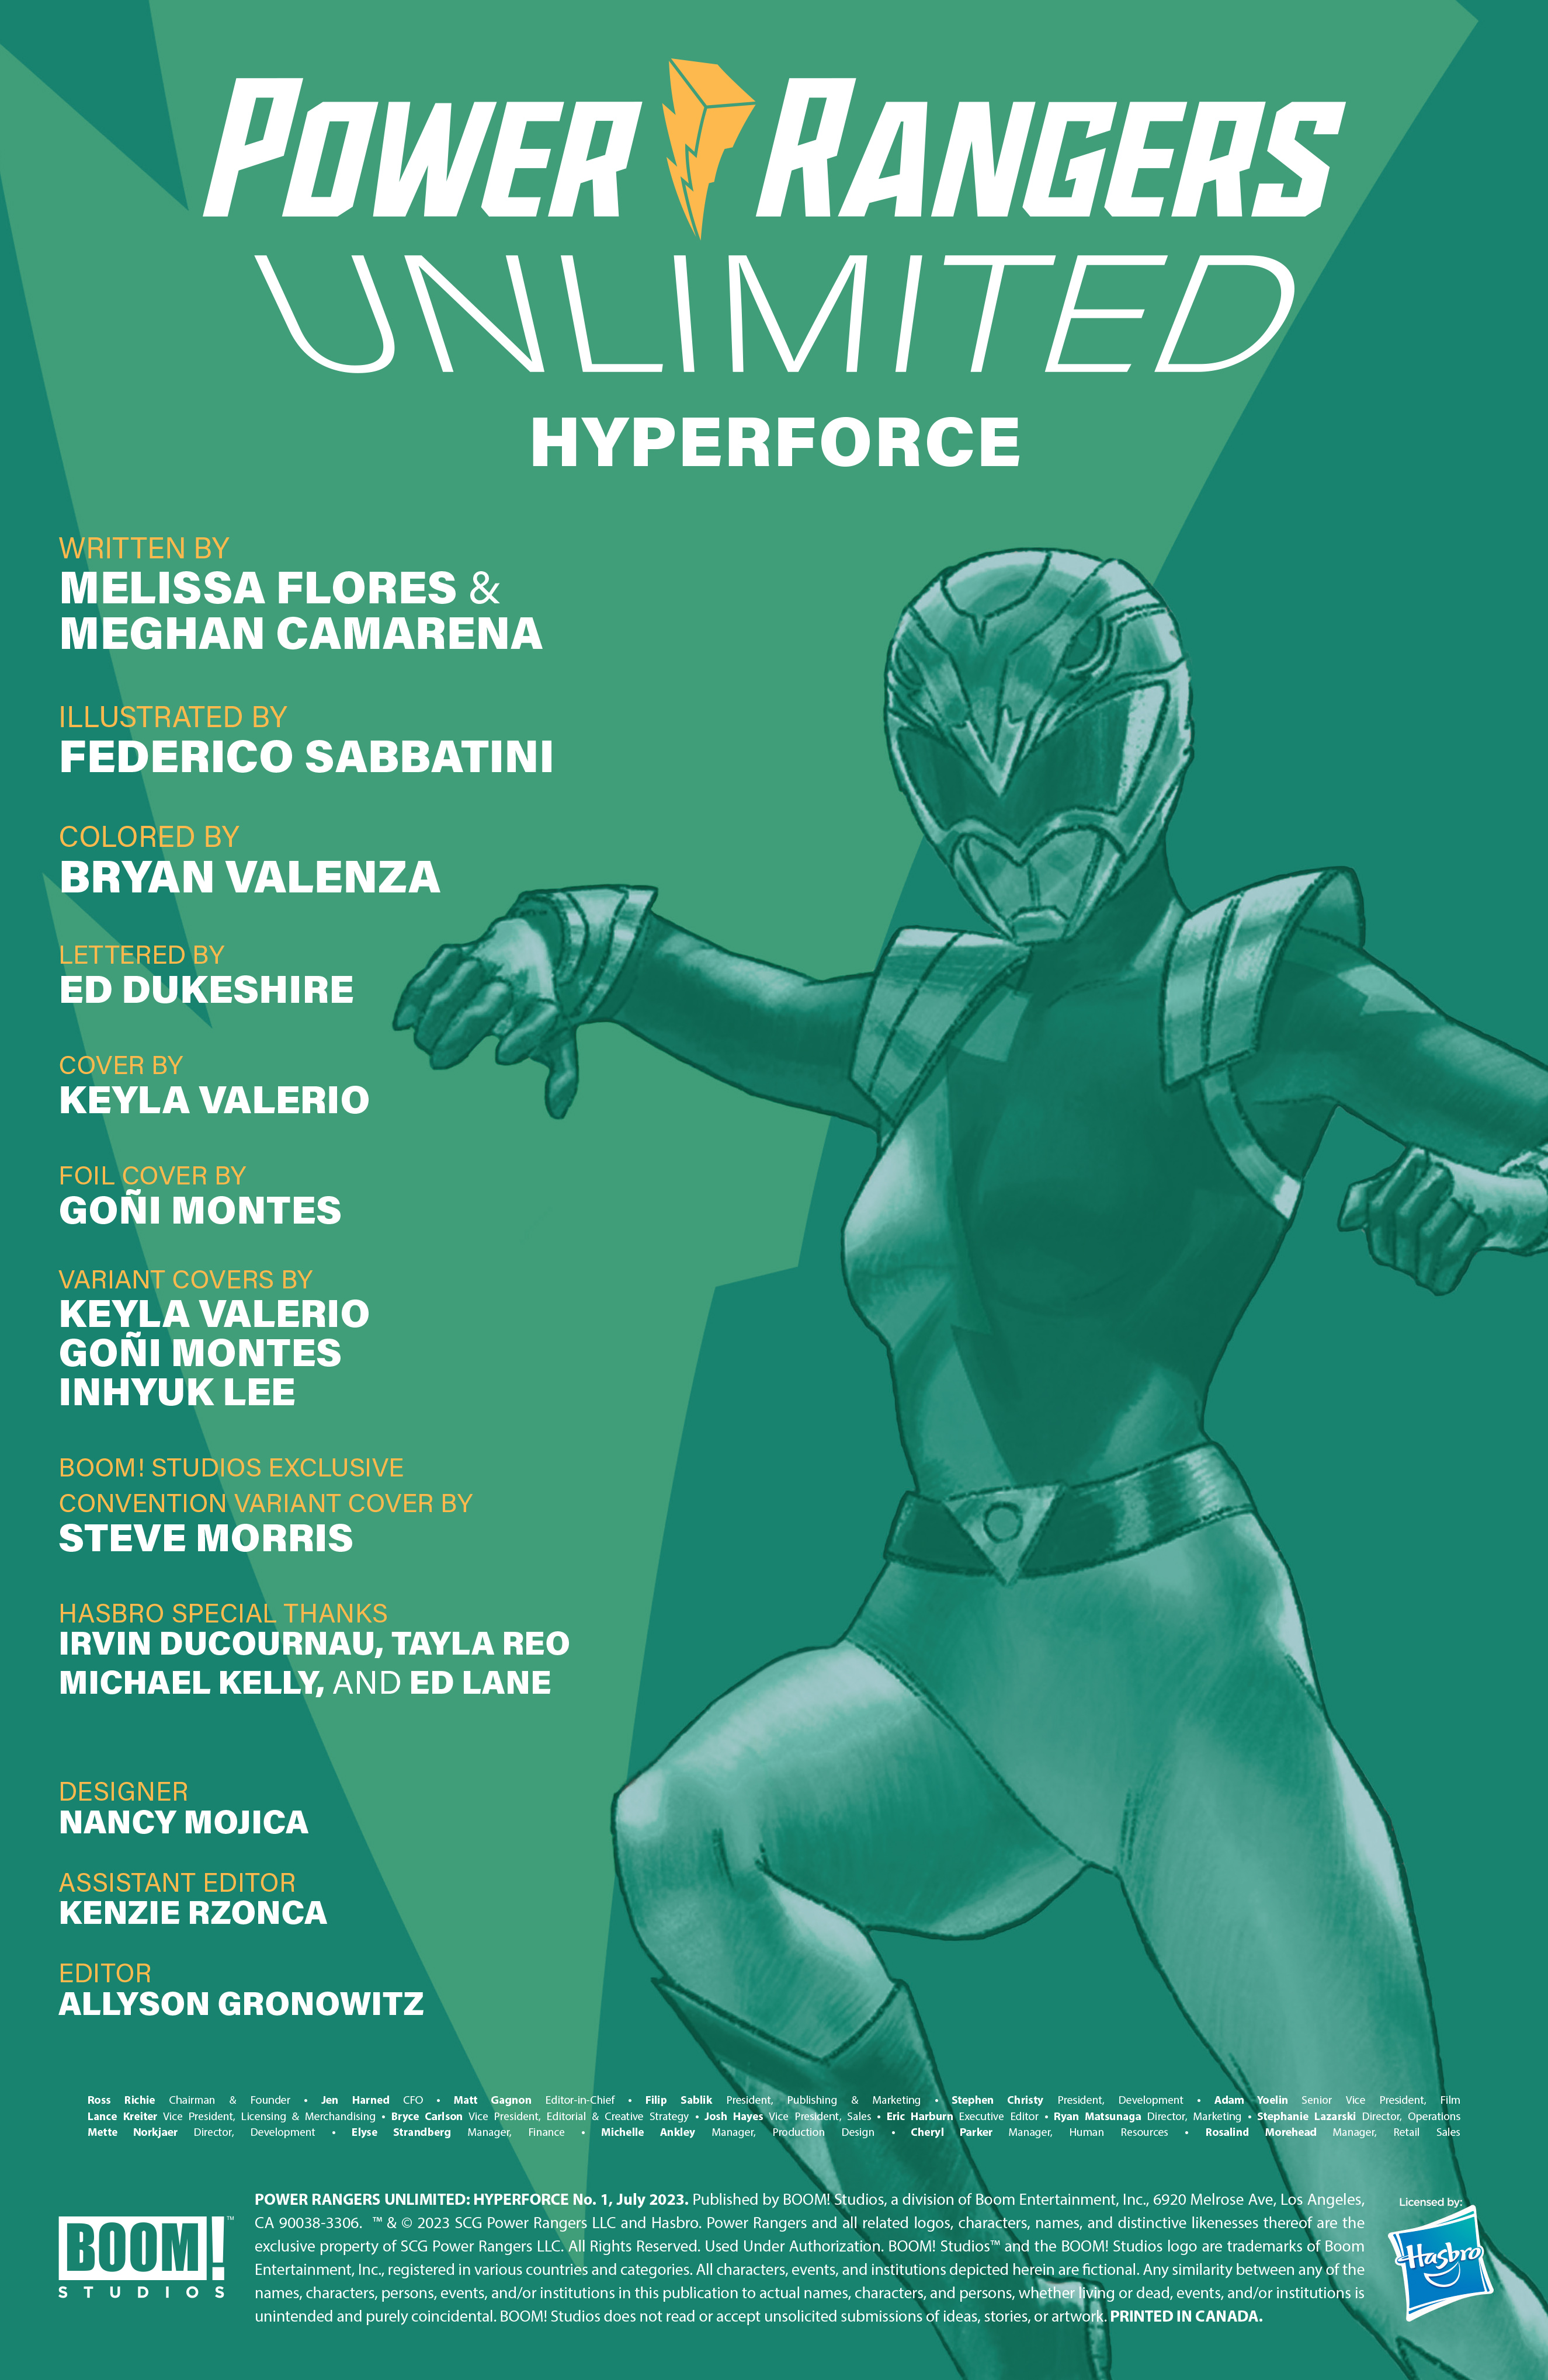 Read online Power Rangers Unlimited comic -  Issue # HyperForce - 2